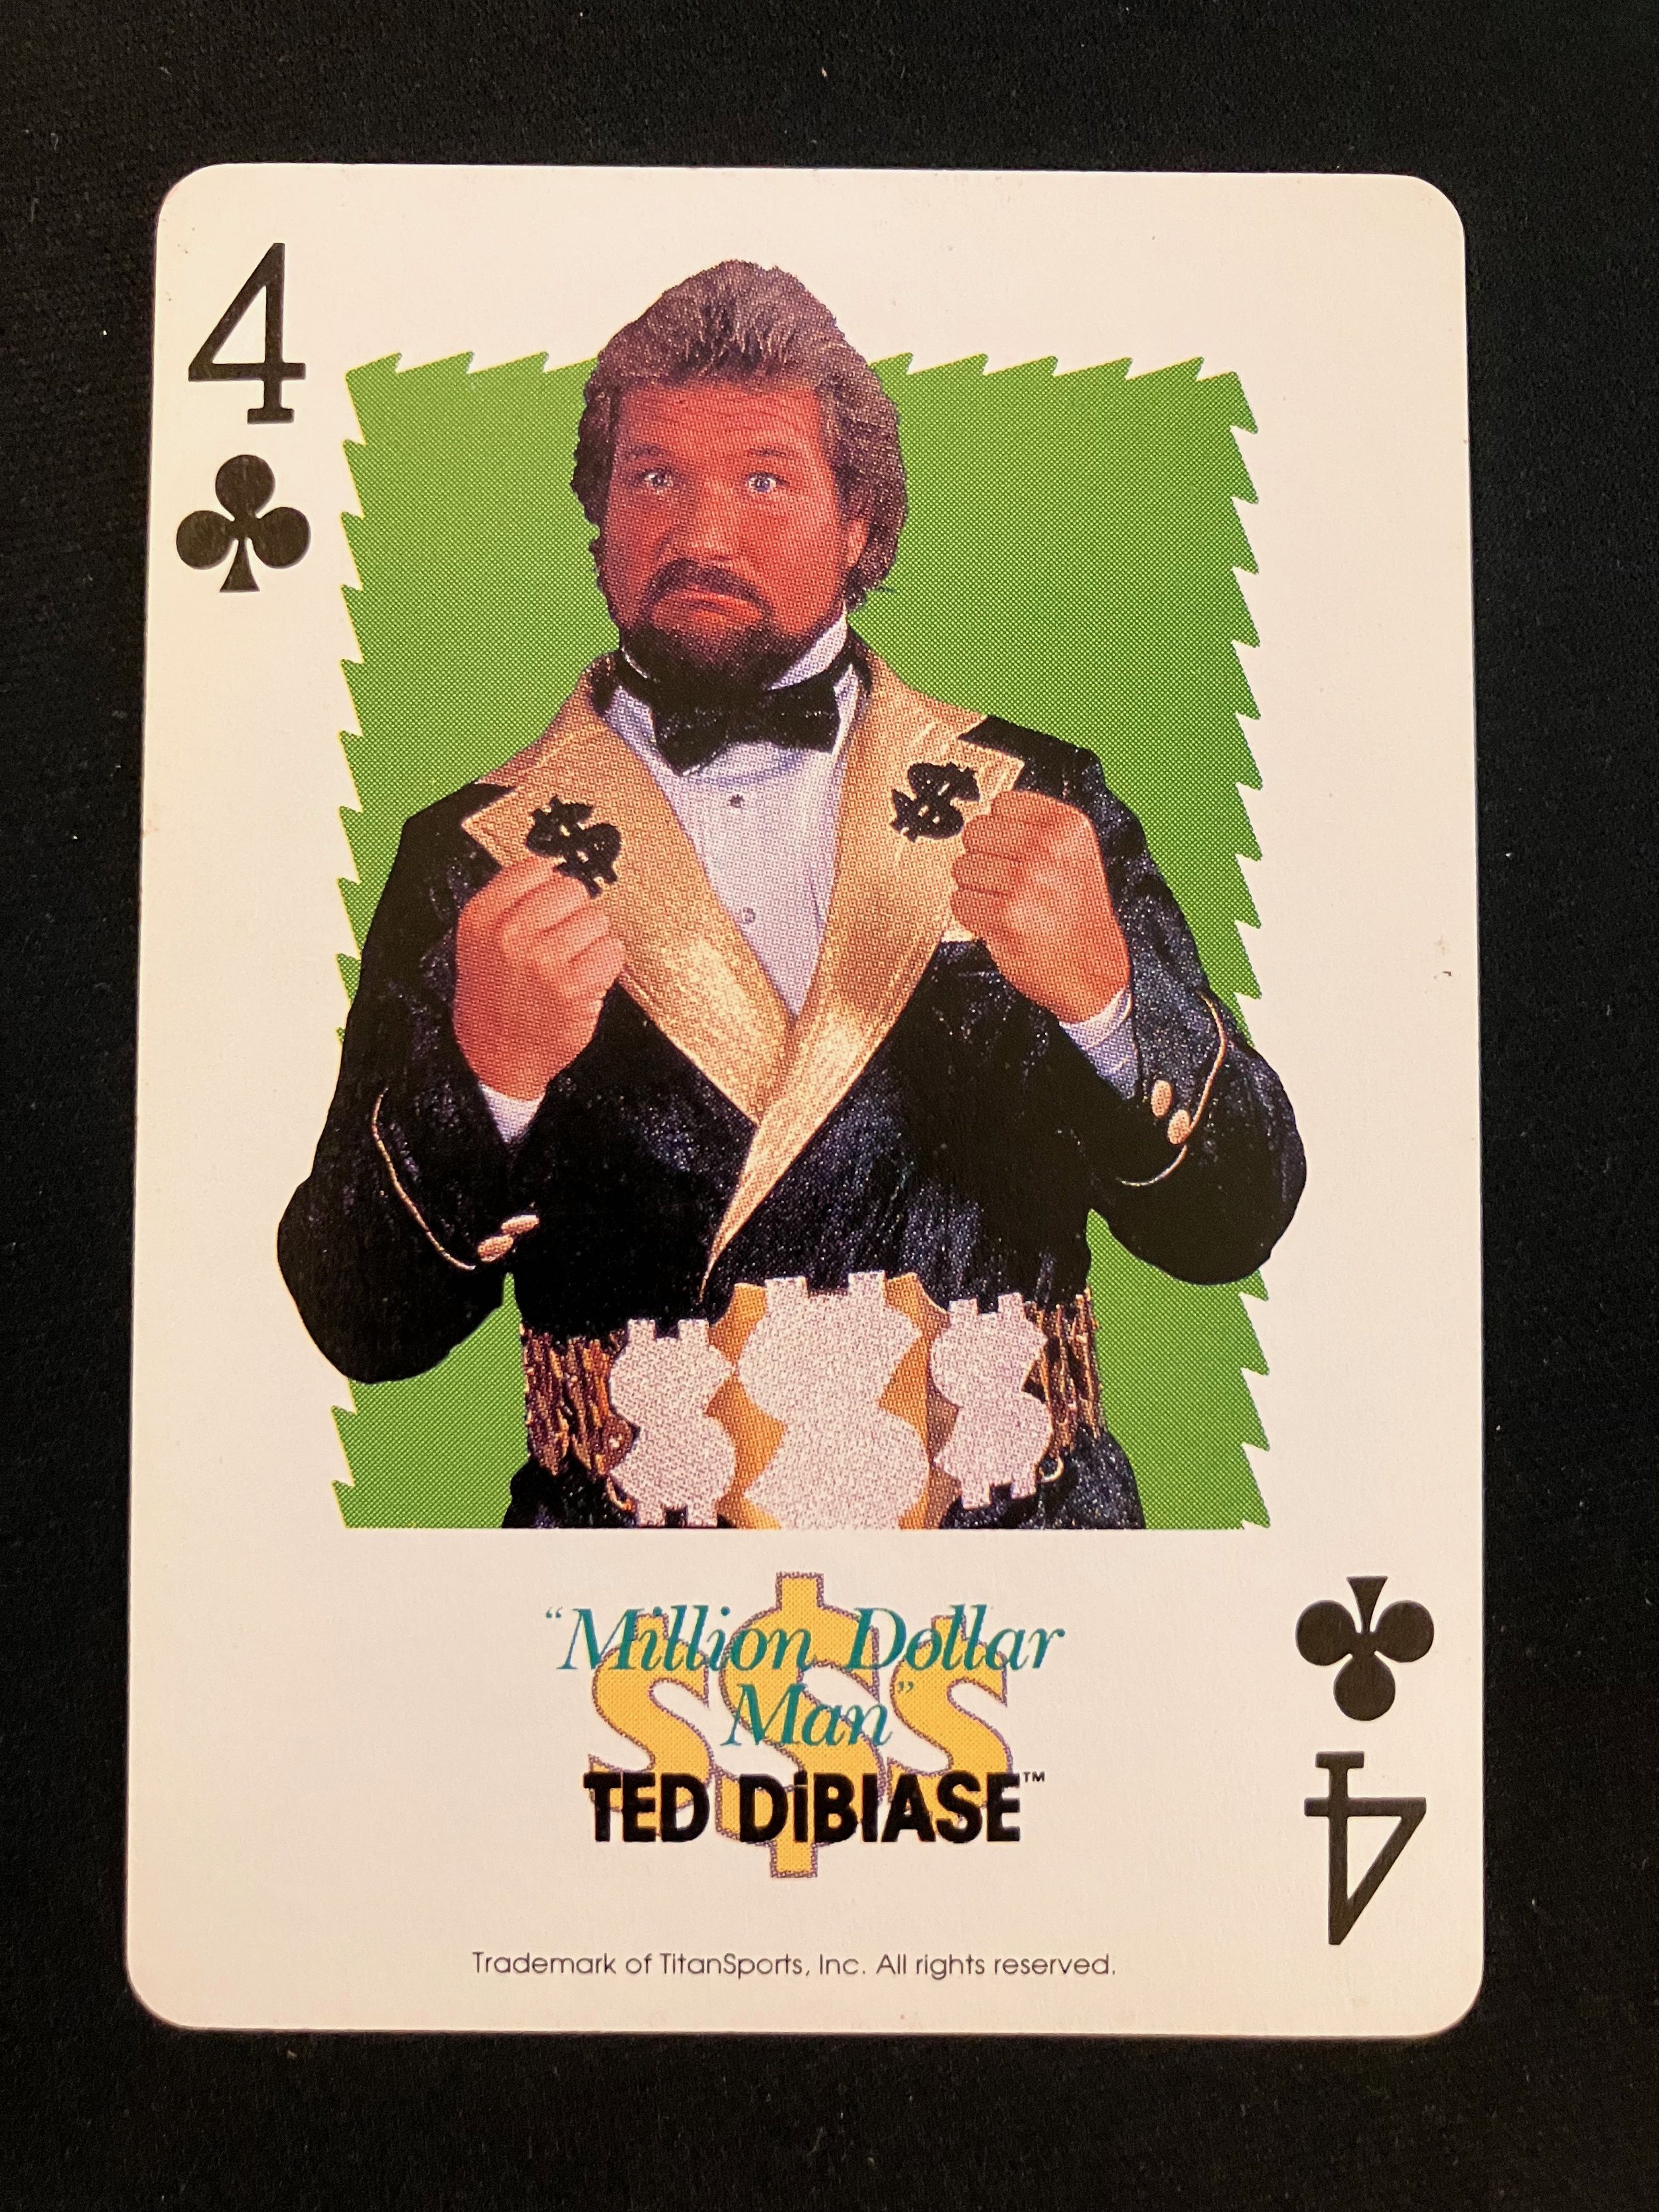 4 of Clubs - Ted Dibiase